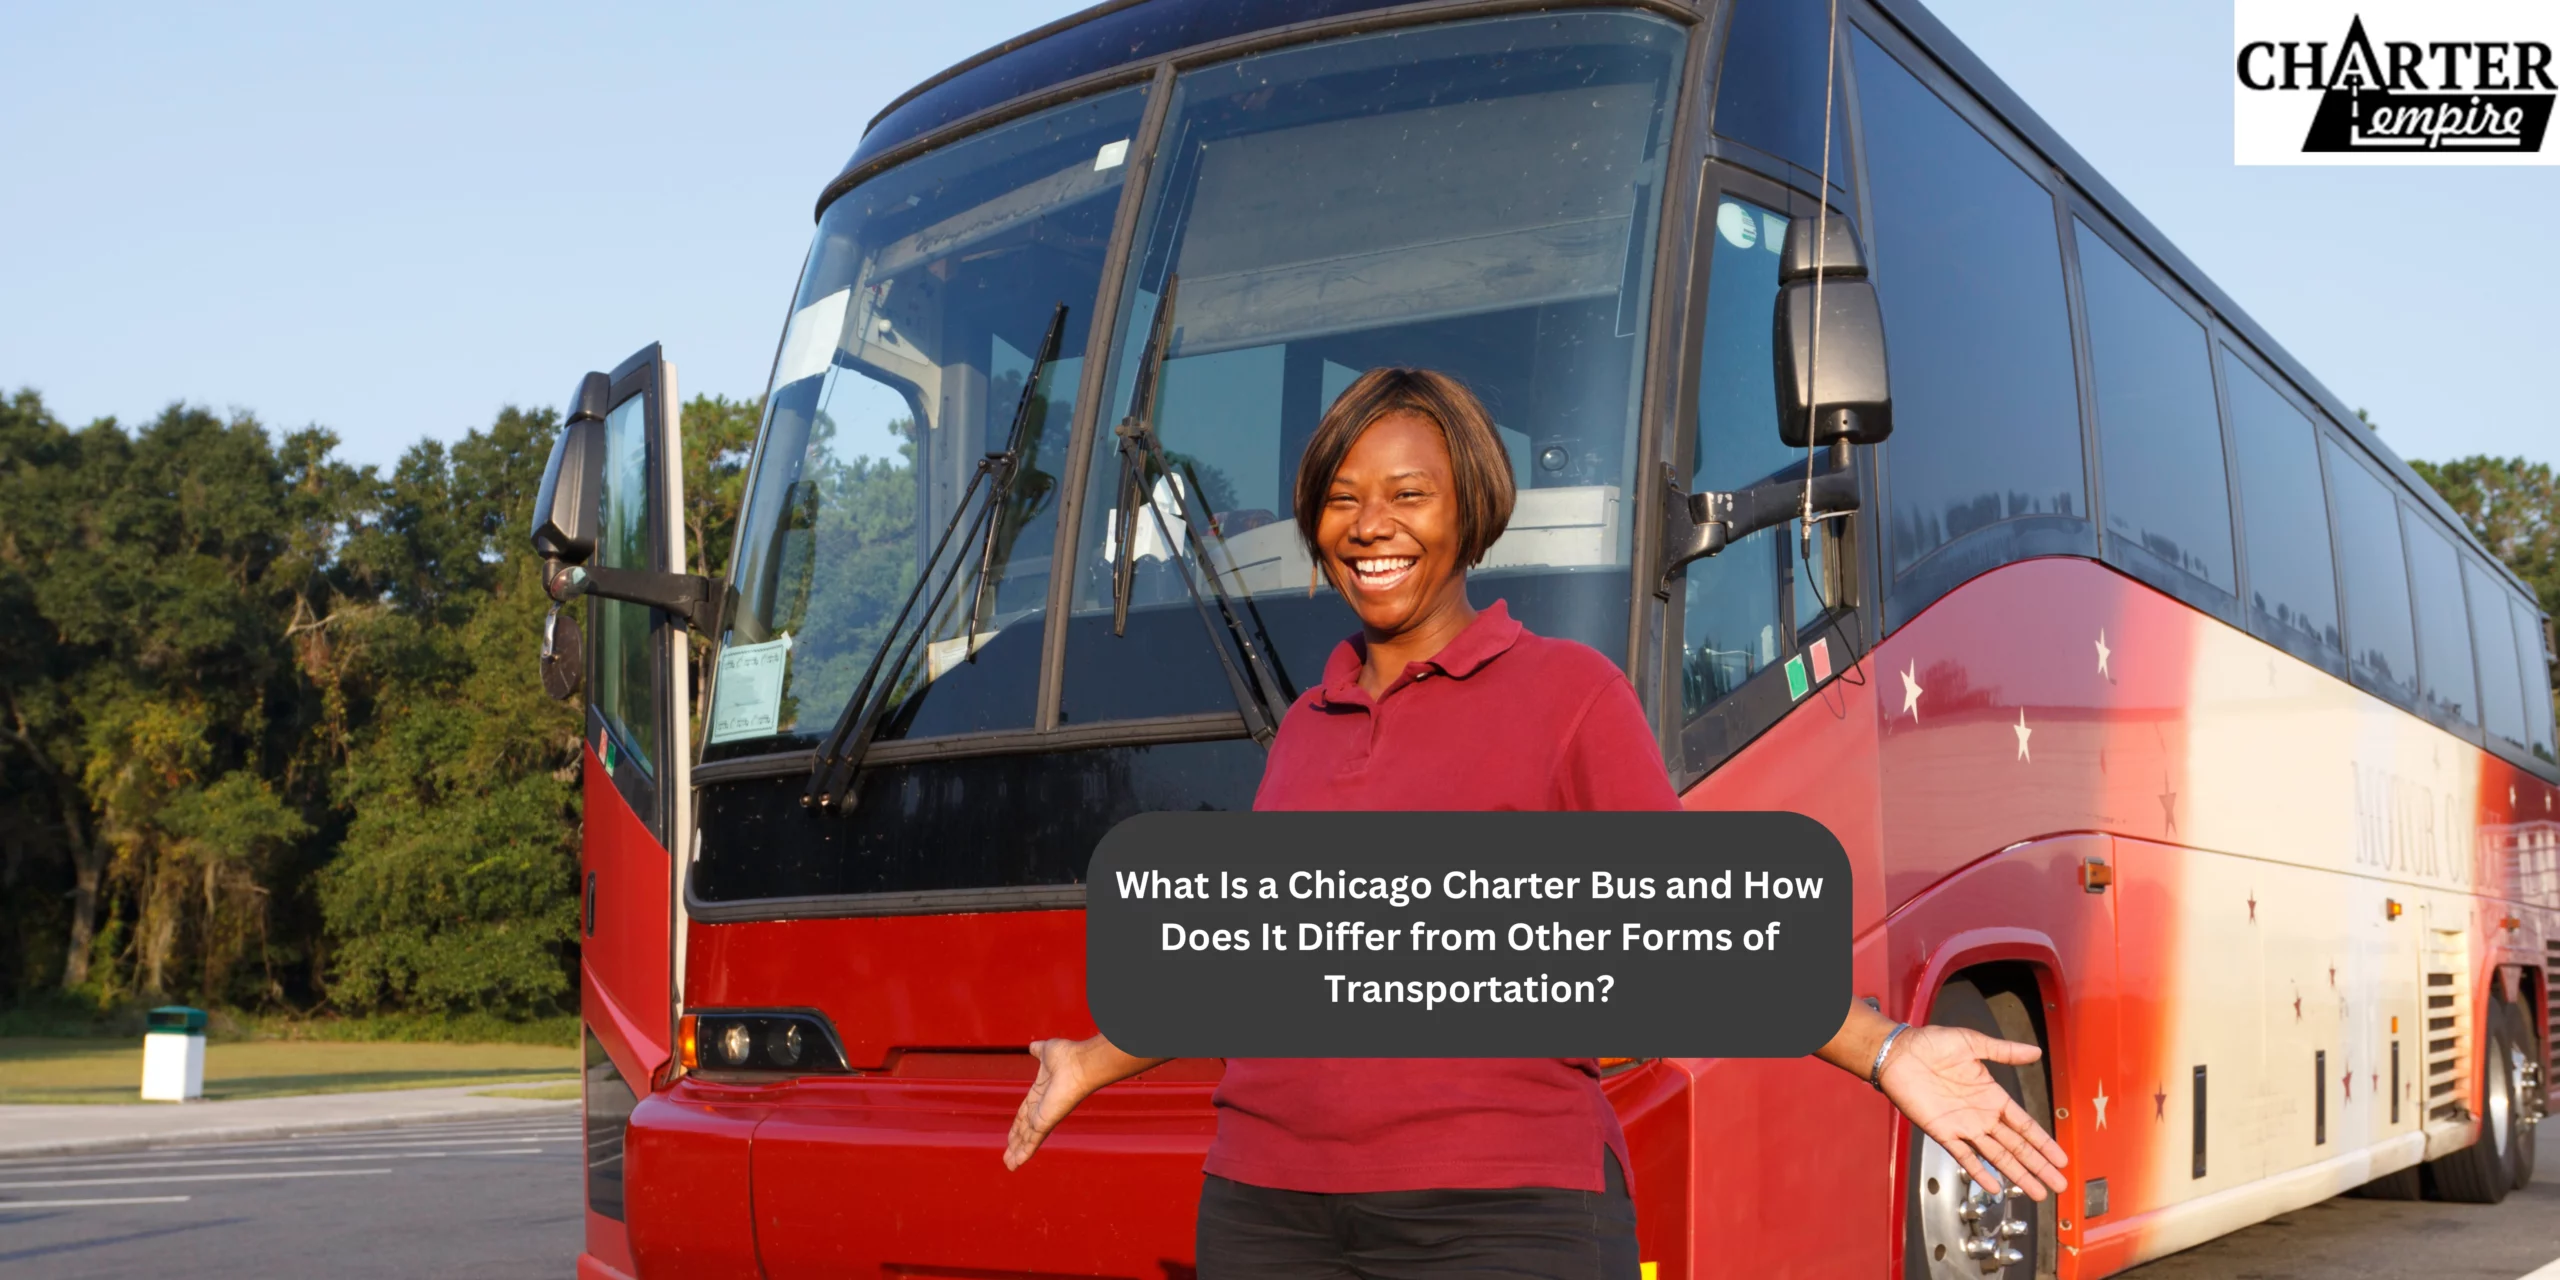 What Is a Chicago Charter Bus and How Does It Differ from Other Forms of Transportation?